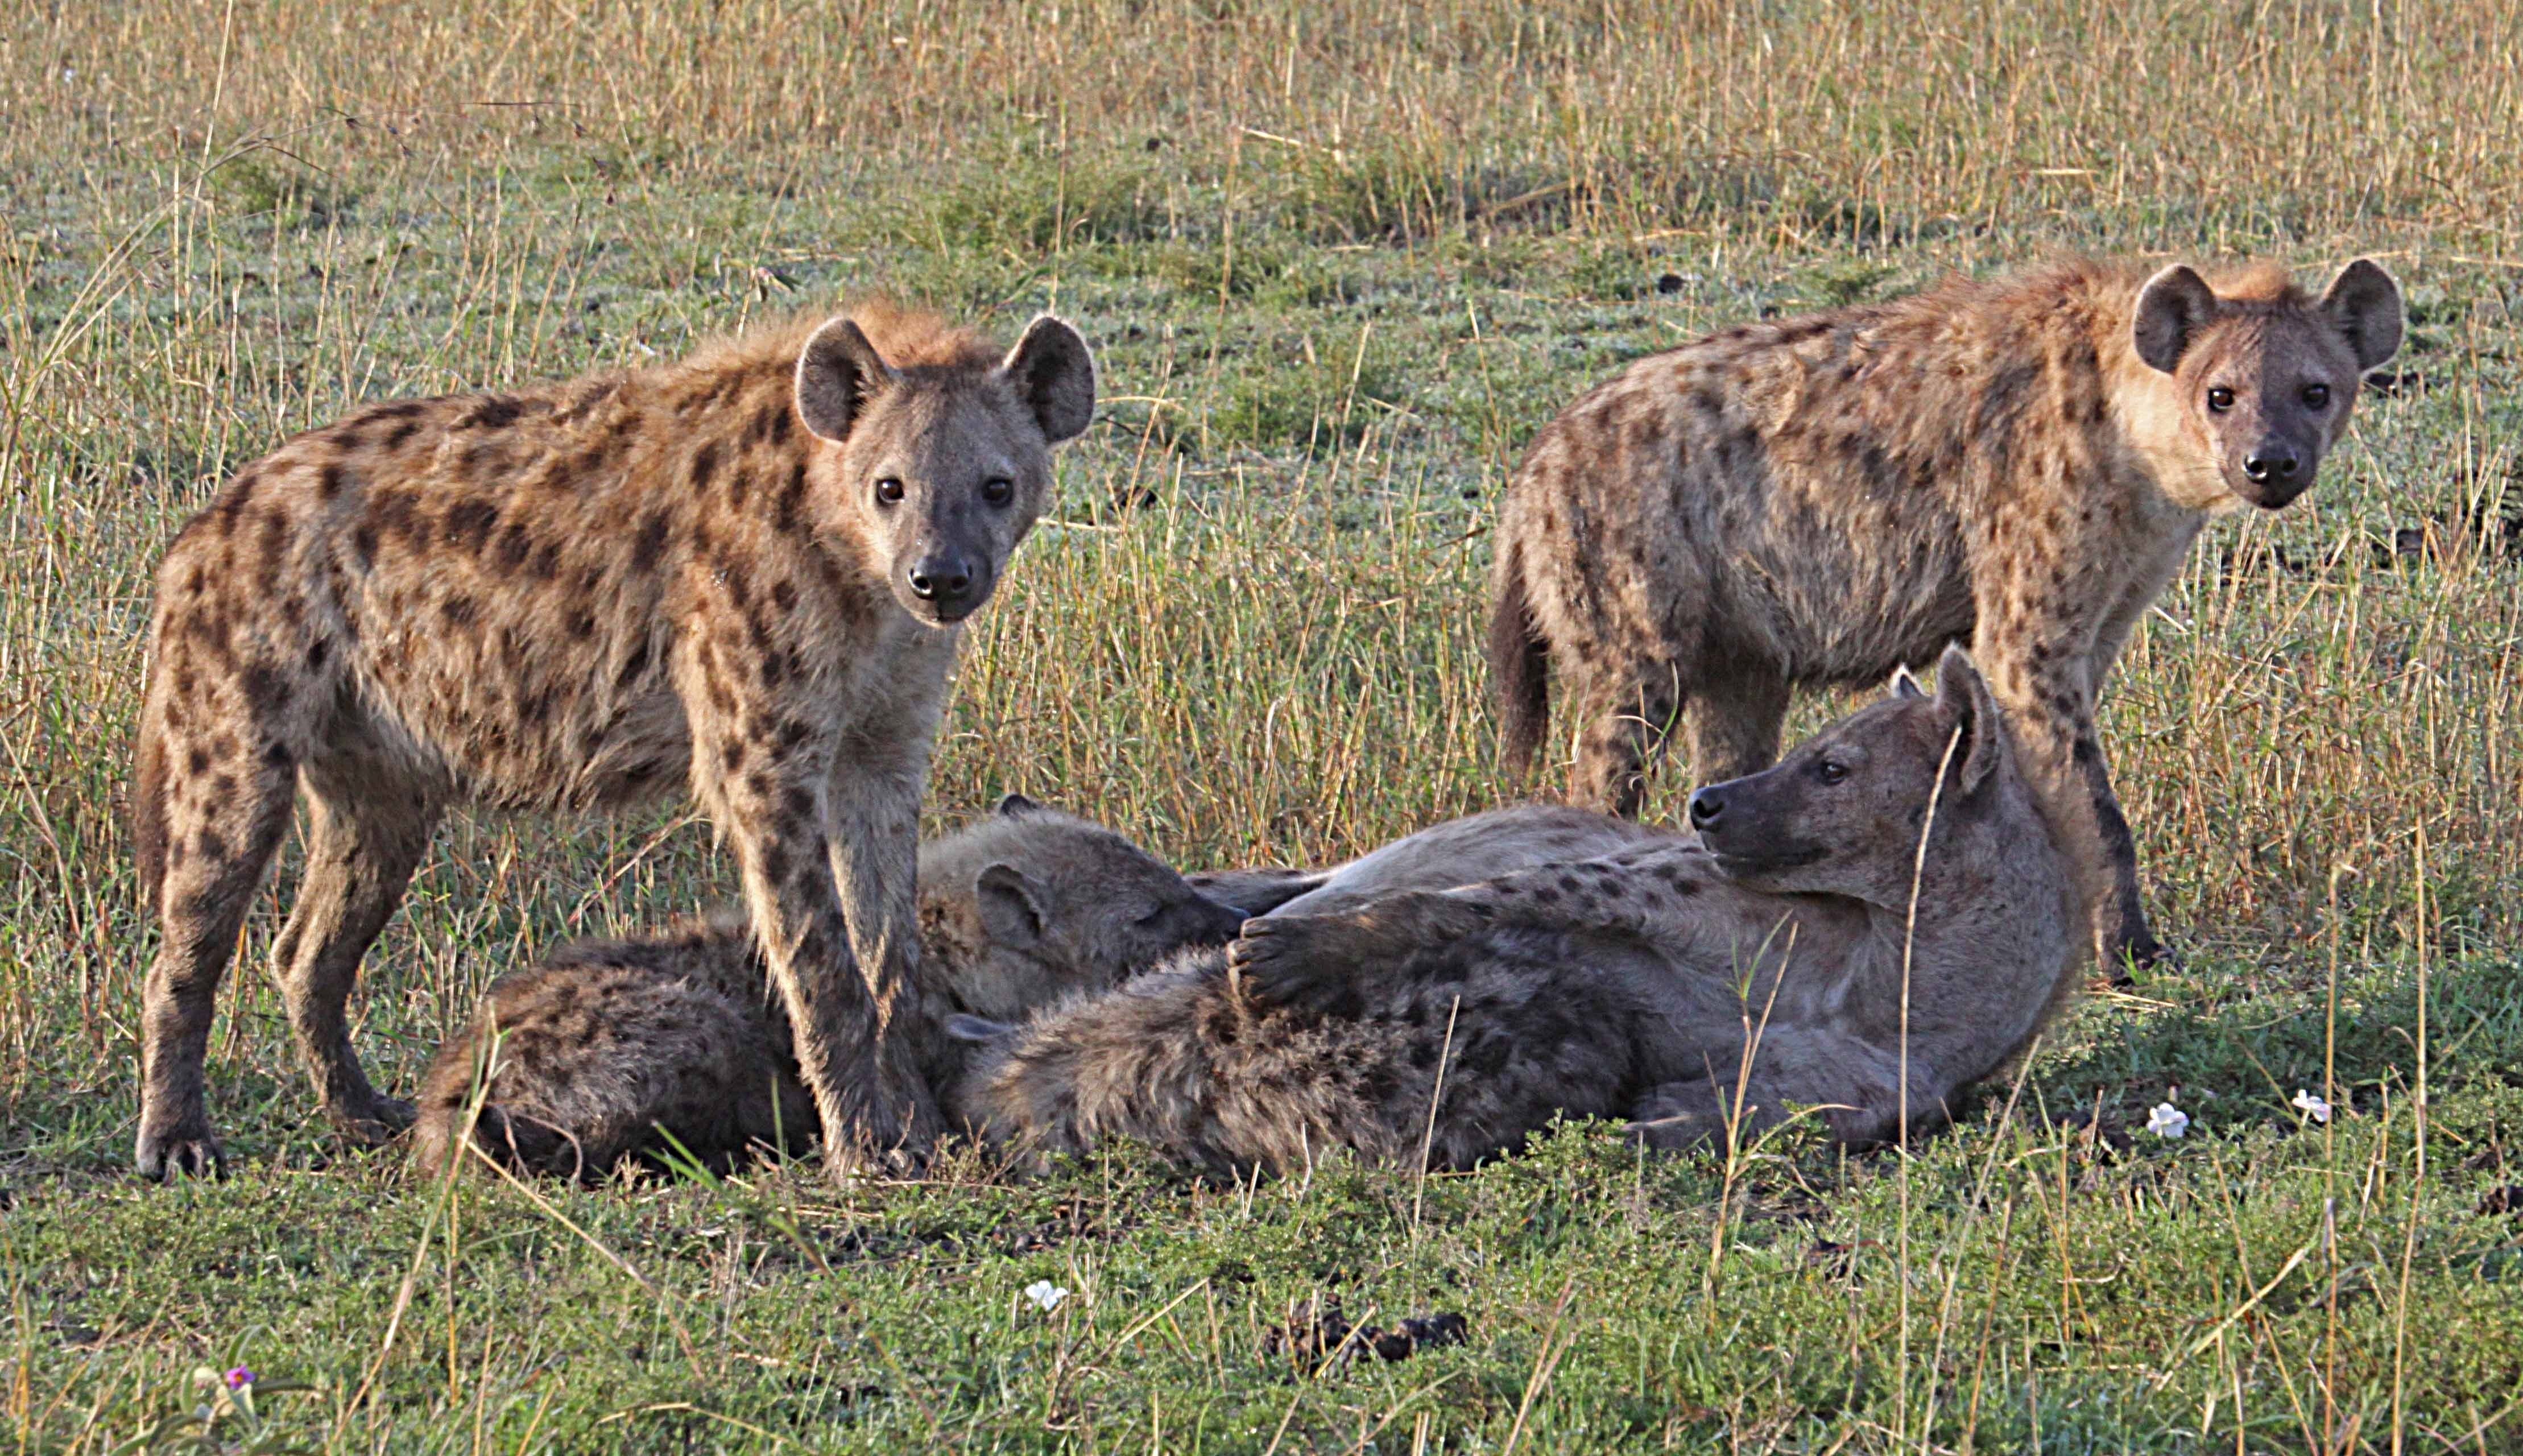 Group of Hyena in Grass